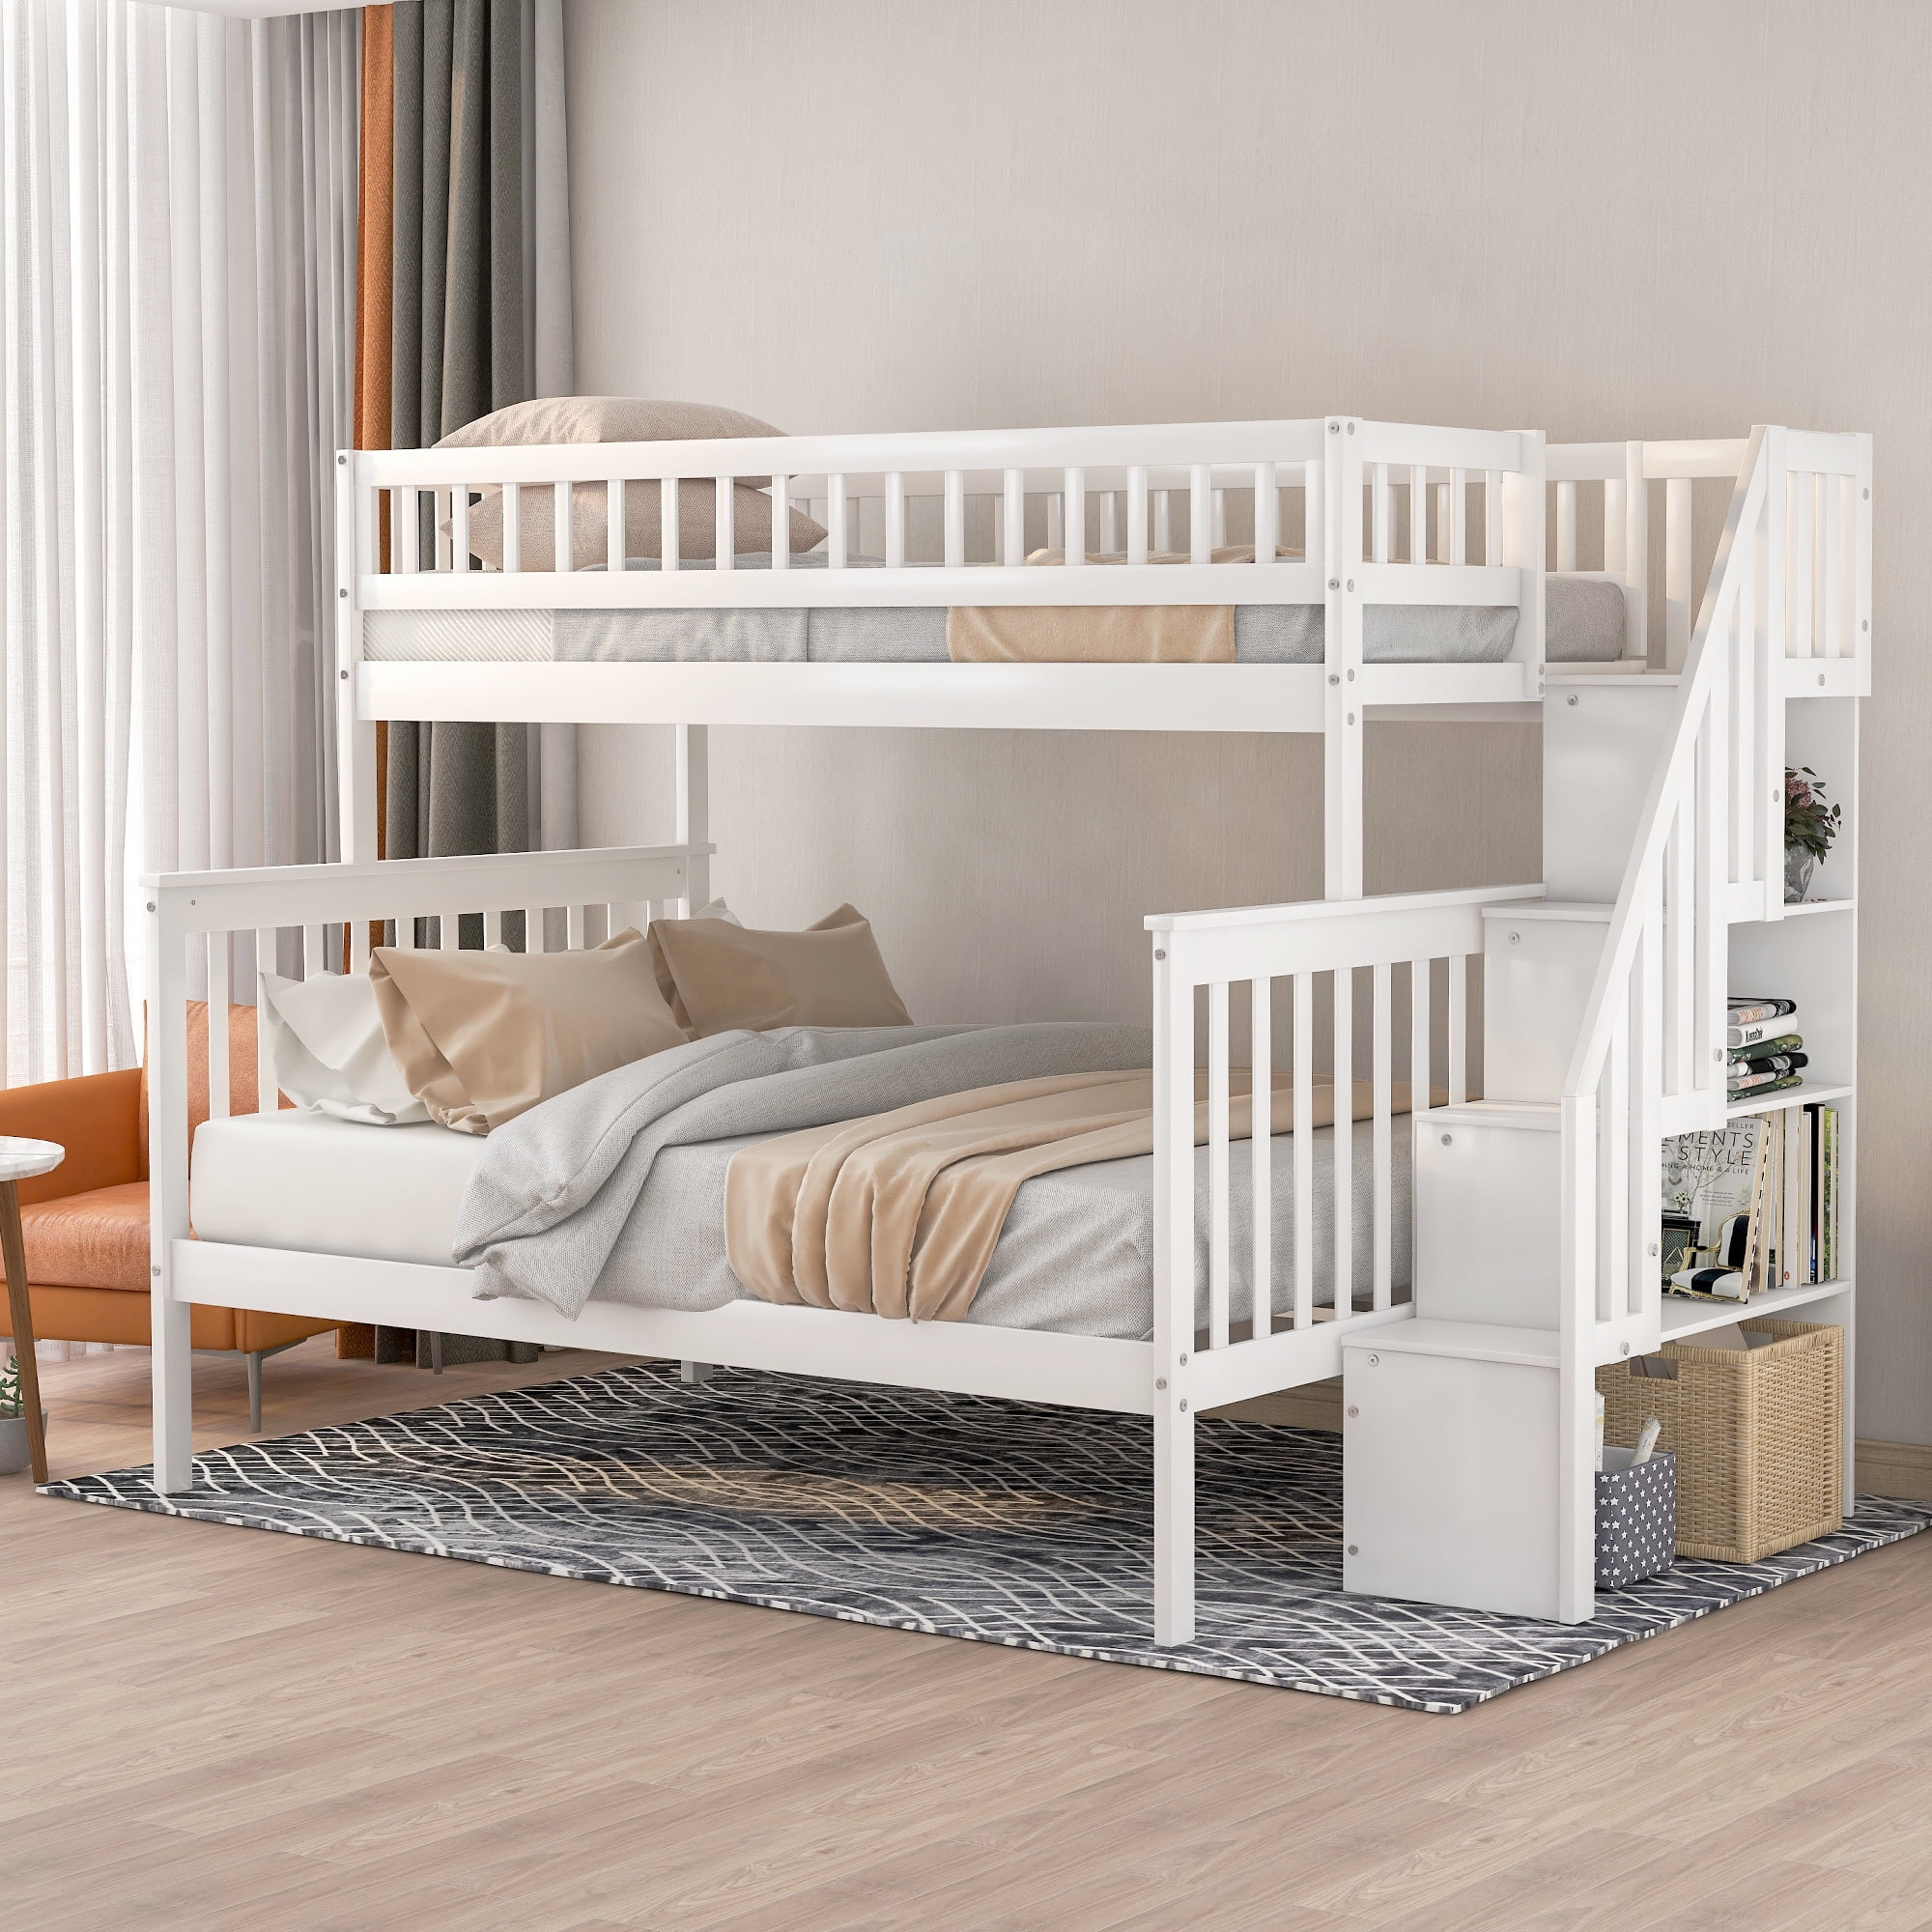 Furniture Twin Over Full Bunk Bed, Gray Twin Over Full Bunk Bed With Stairs And Storage